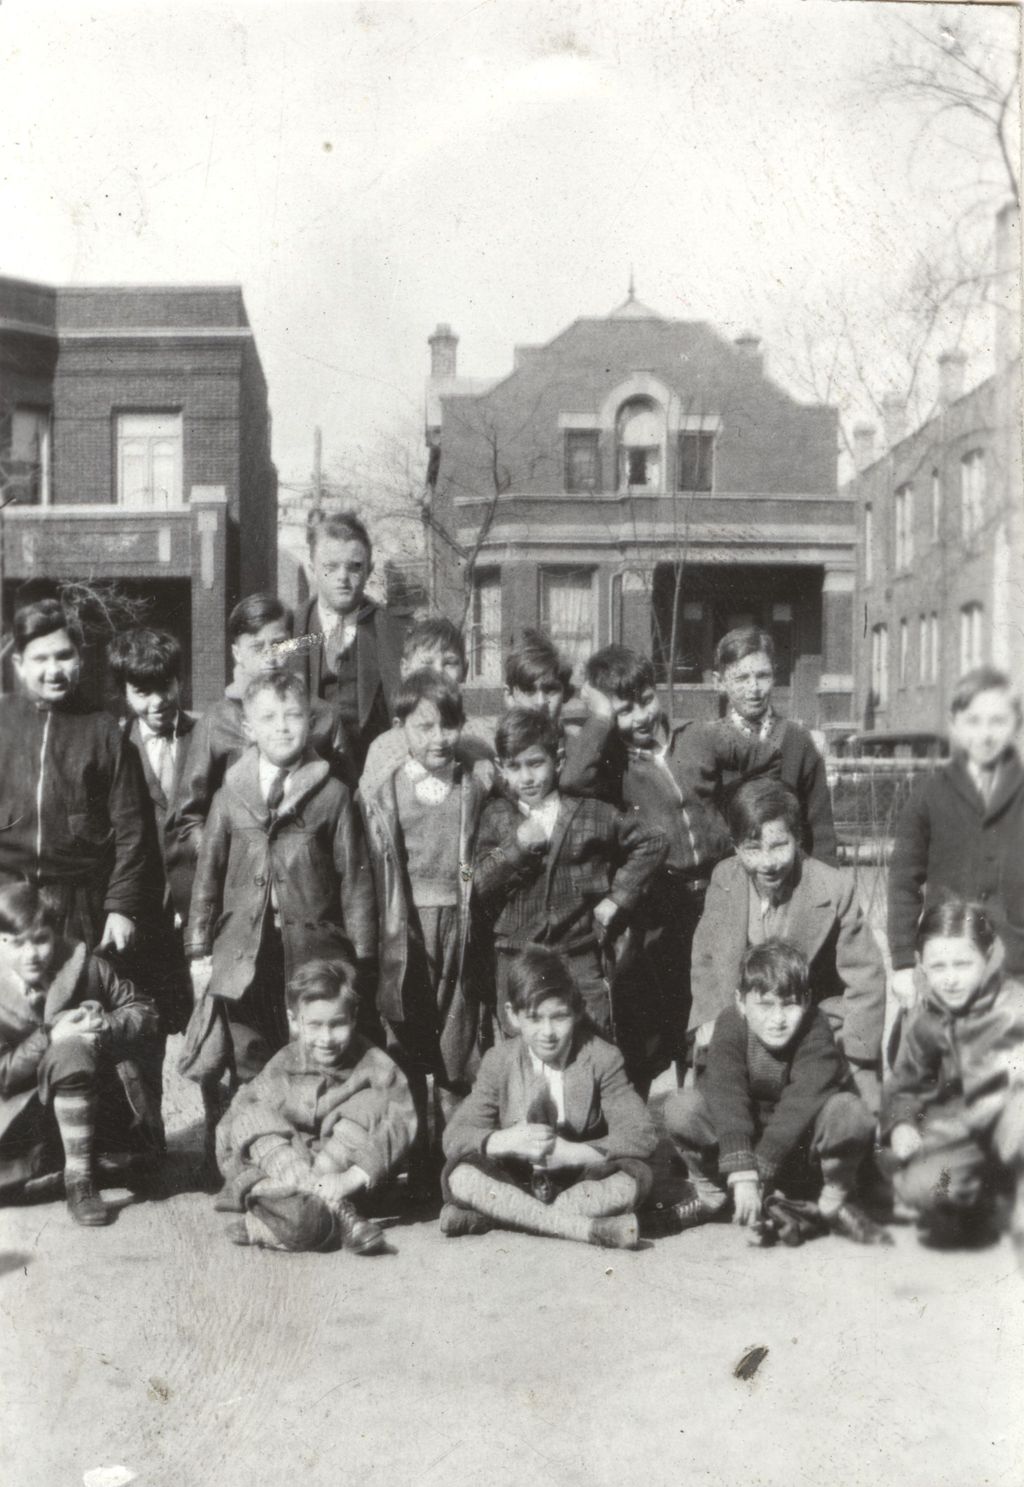 Members of "The Wanderers" from the Marcy Center's Boys Club